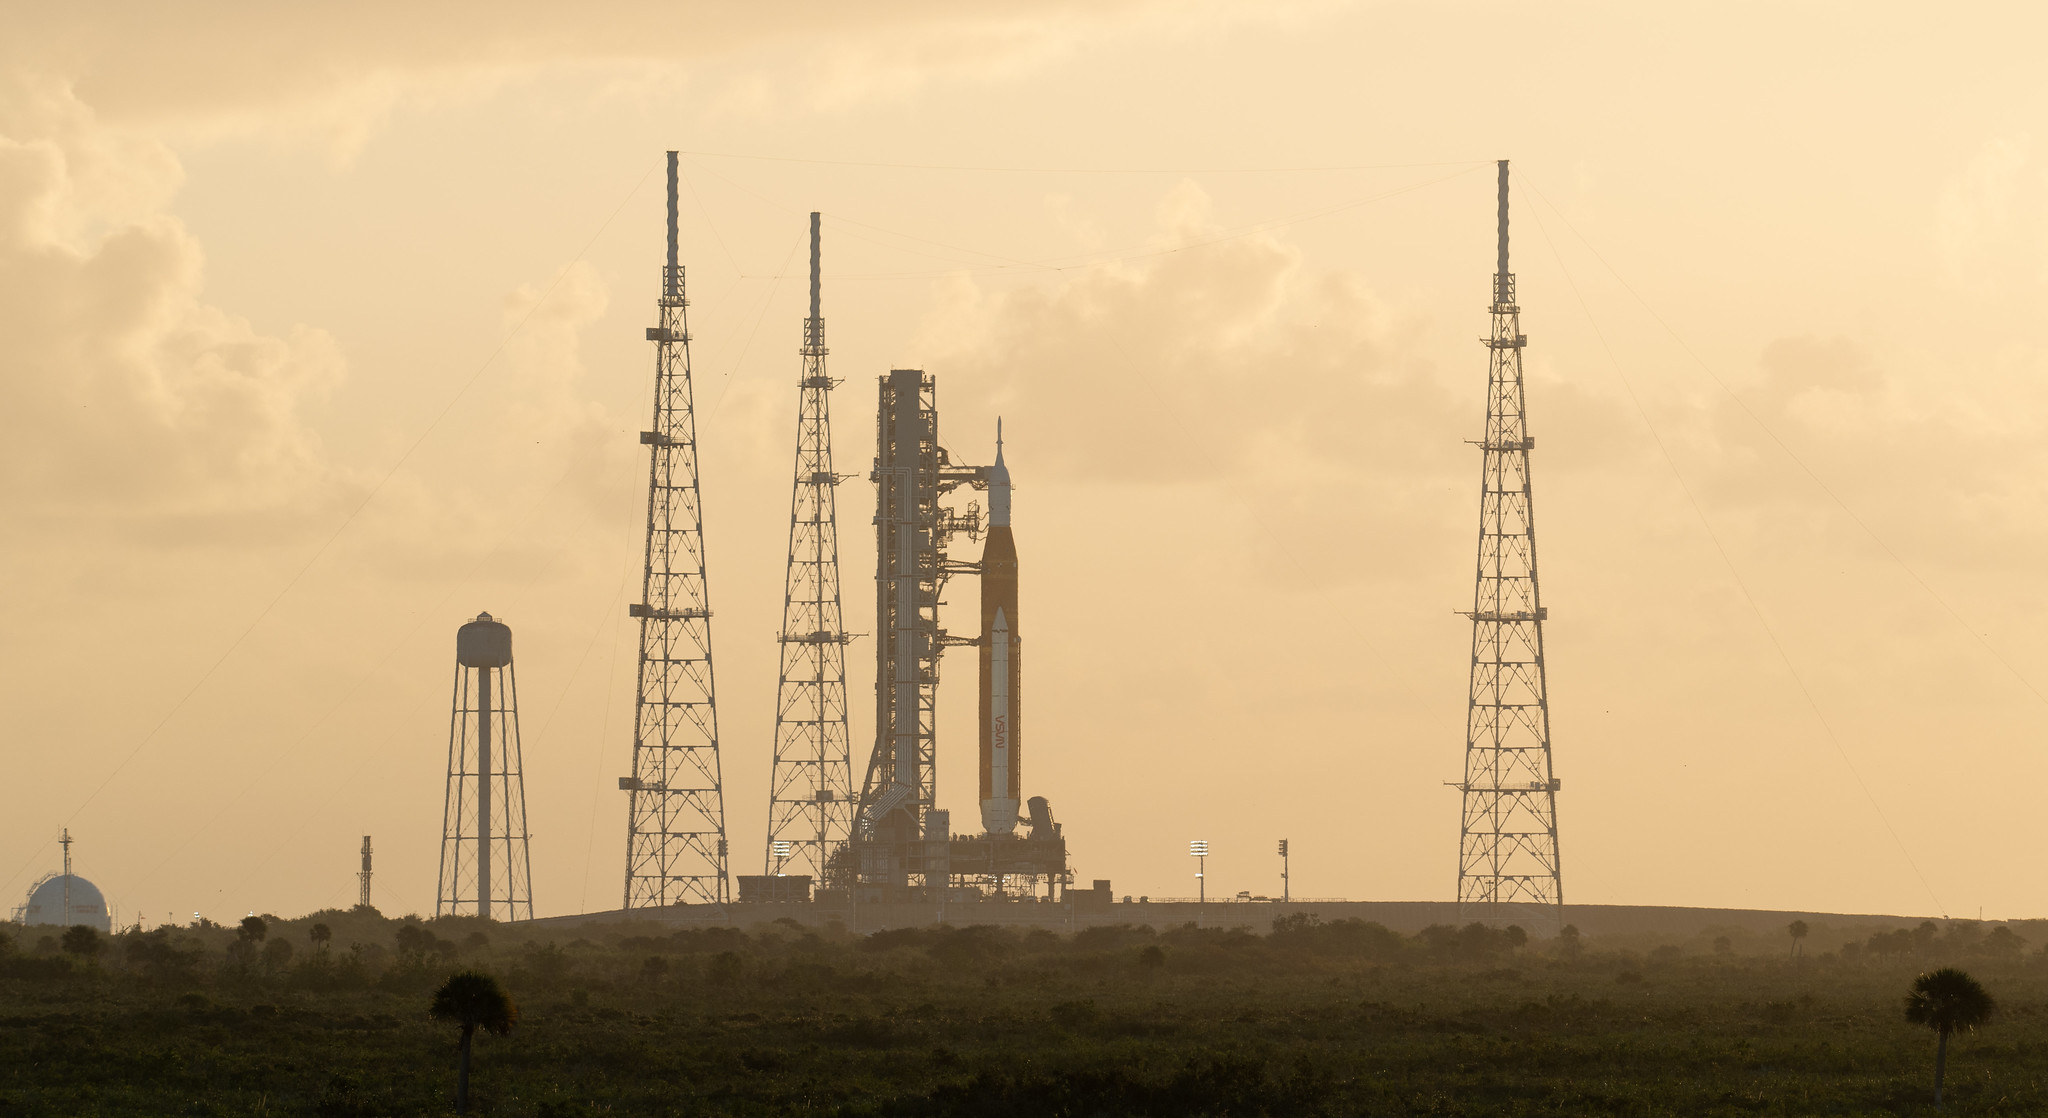 NASA's Space Launch System (SLS) rocket with the Orion spacecraft aboard is seen atop the mobile launcher at Launch Pad 39B as preparations for launch continue, Monday, Nov. 7, 2022, at NASA’s Kennedy Space Center in Florida.